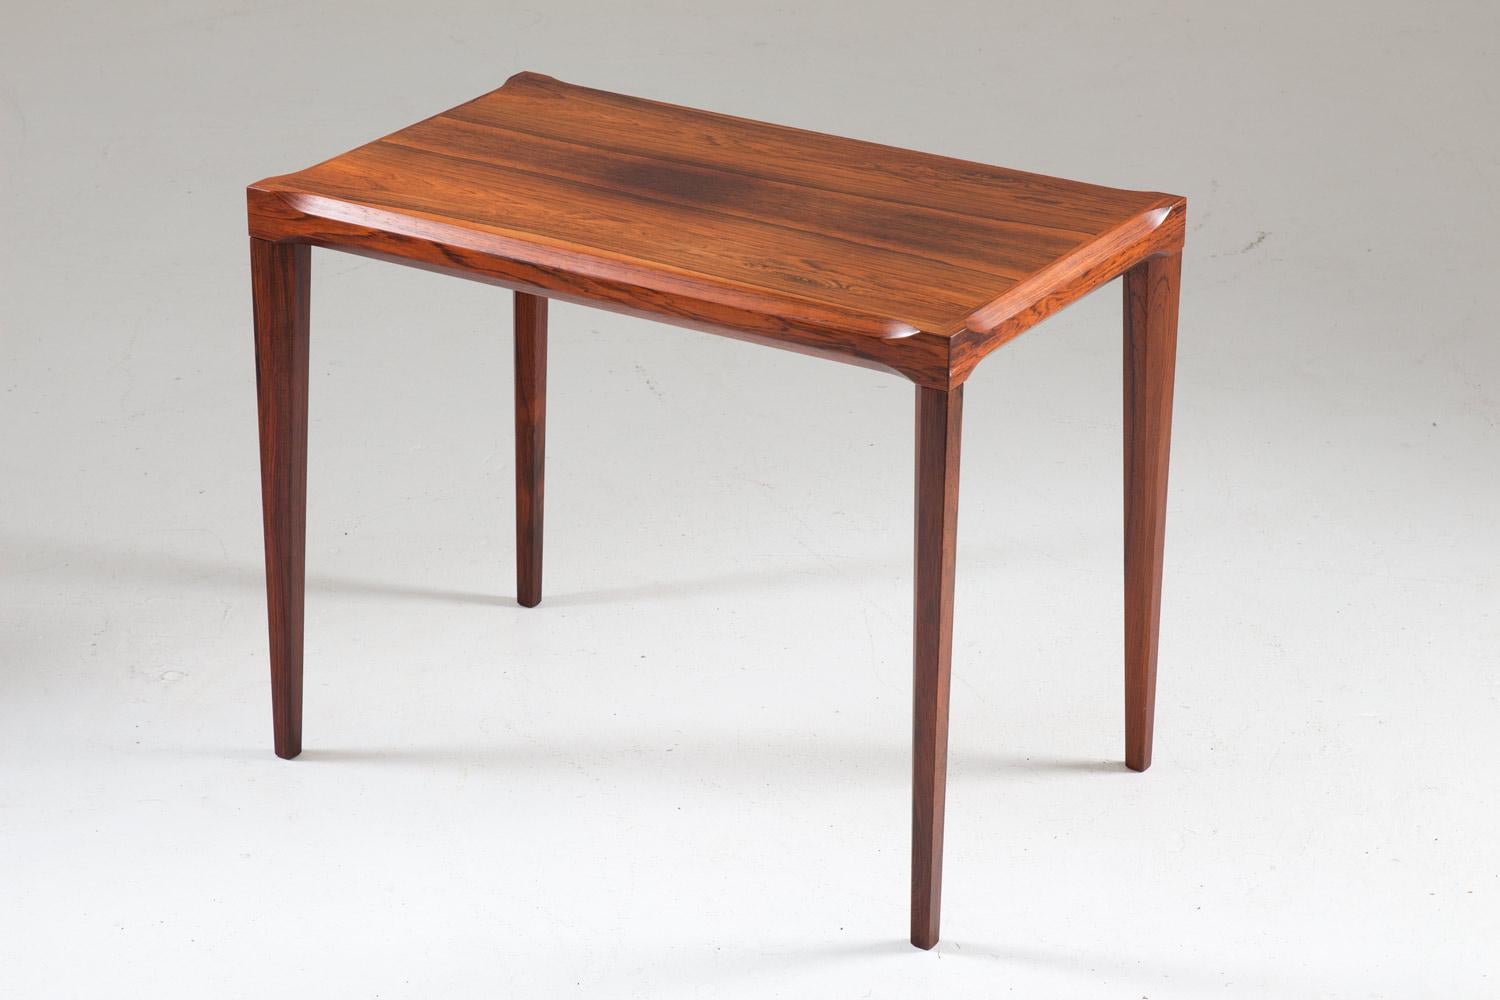 A pair of midcentury side tables in rosewood by Swedish manufacturer Slutarp.
These high-quality side tables have a minimalistic design with distinct lines and beautiful grain in the wood.

Condition: Very good original condition. Partly